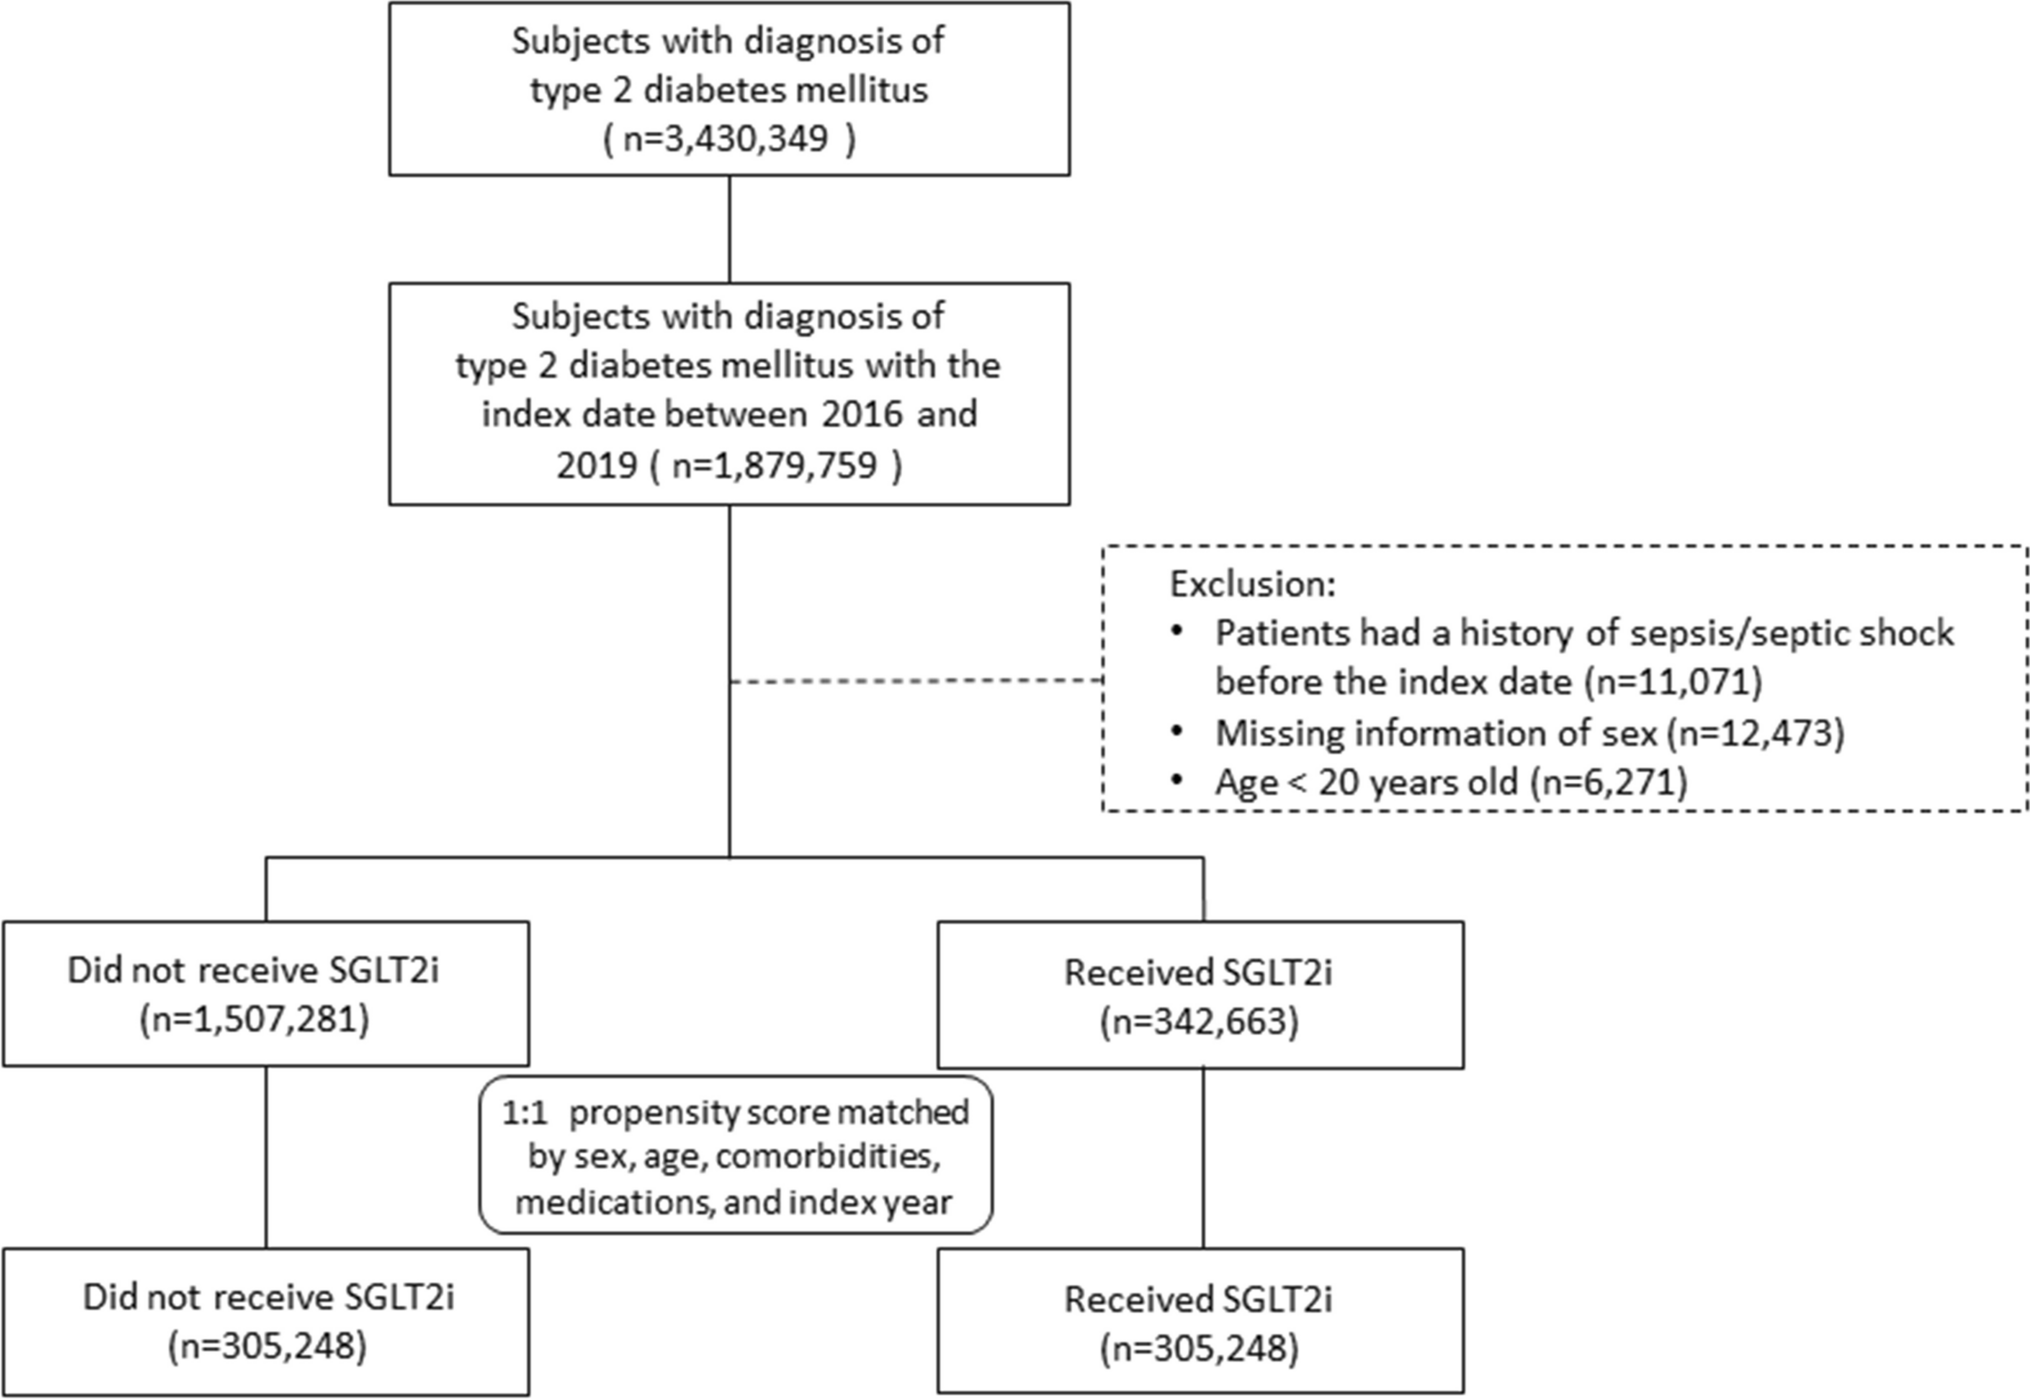 Sodium-glucose cotransporter-2 inhibitor in risk of sepsis/septic shock among patients with type 2 diabetes mellitus—a retrospective analysis of nationwide medical claims data